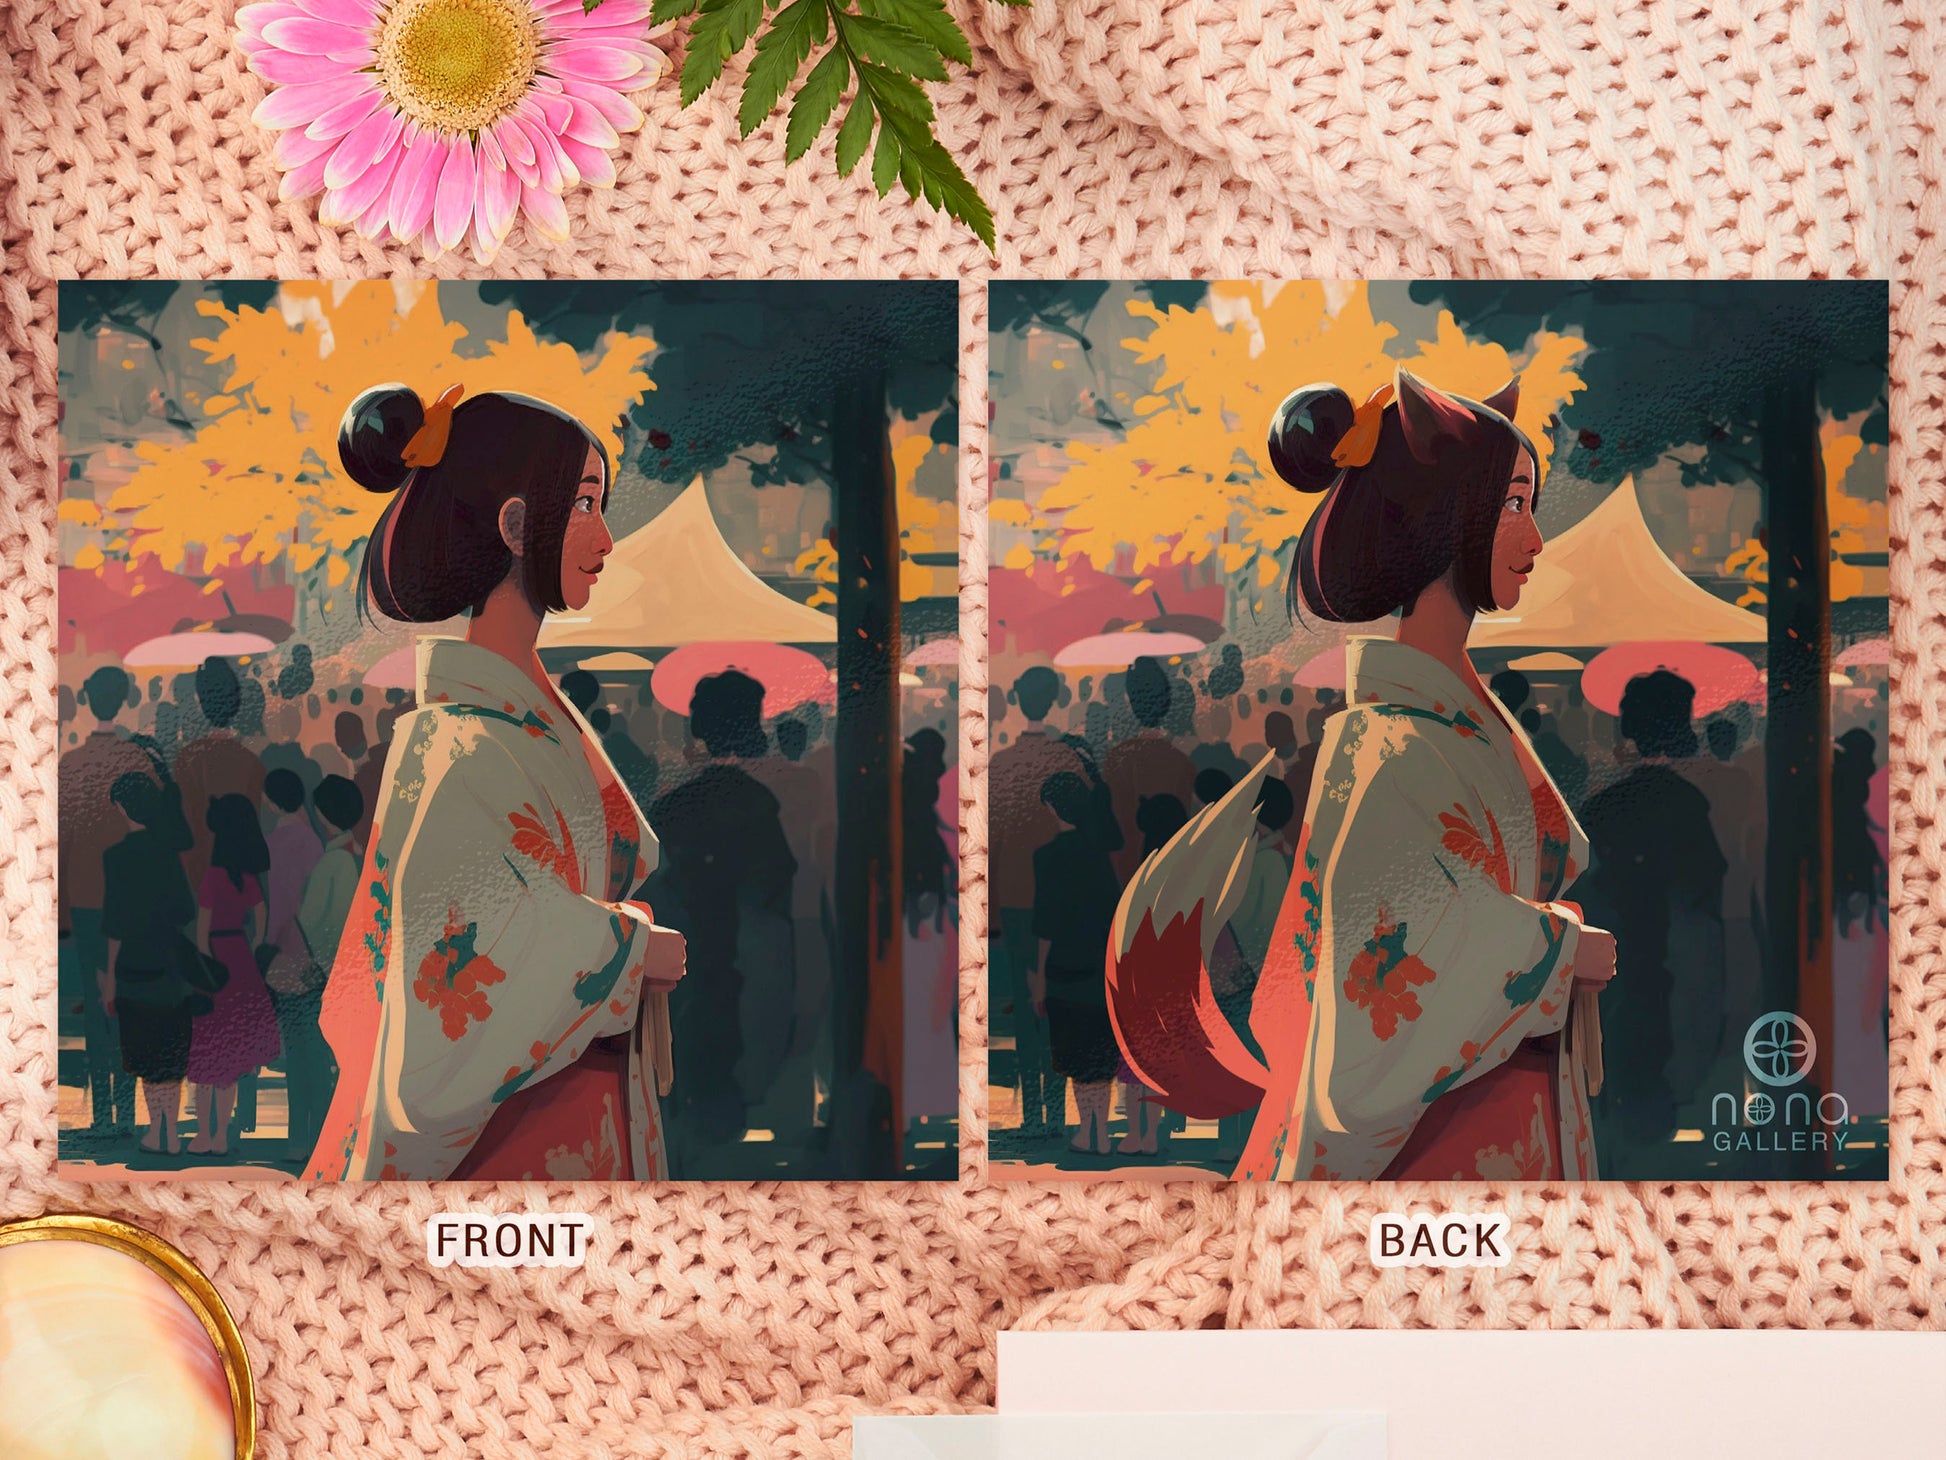 Digital Illustration double sided Art Print of Japanese kitsune fox spirit girl at a Festival wearing a  Kimono. Front side of print shows human girl, the back side shows her as a kitsune with fox tail and ears showing